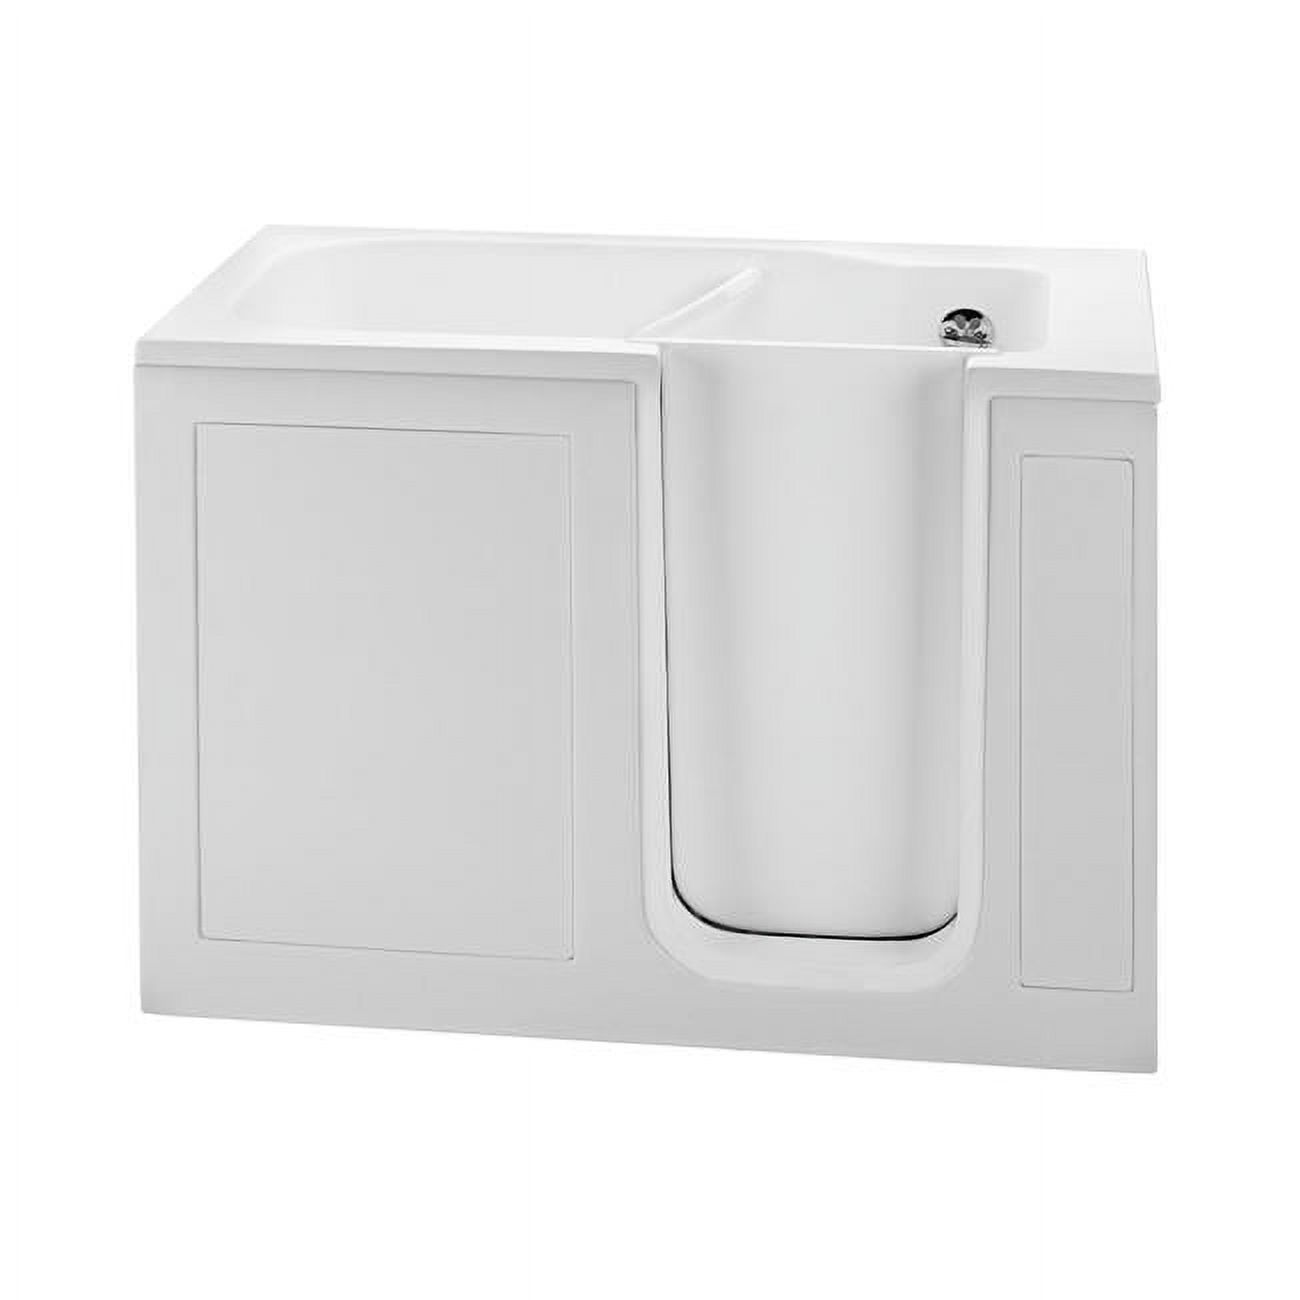 Walk in Air Bath with Radiance & Valves, White - 51.5 x 30.25 x 37.5 in. - image 1 of 1